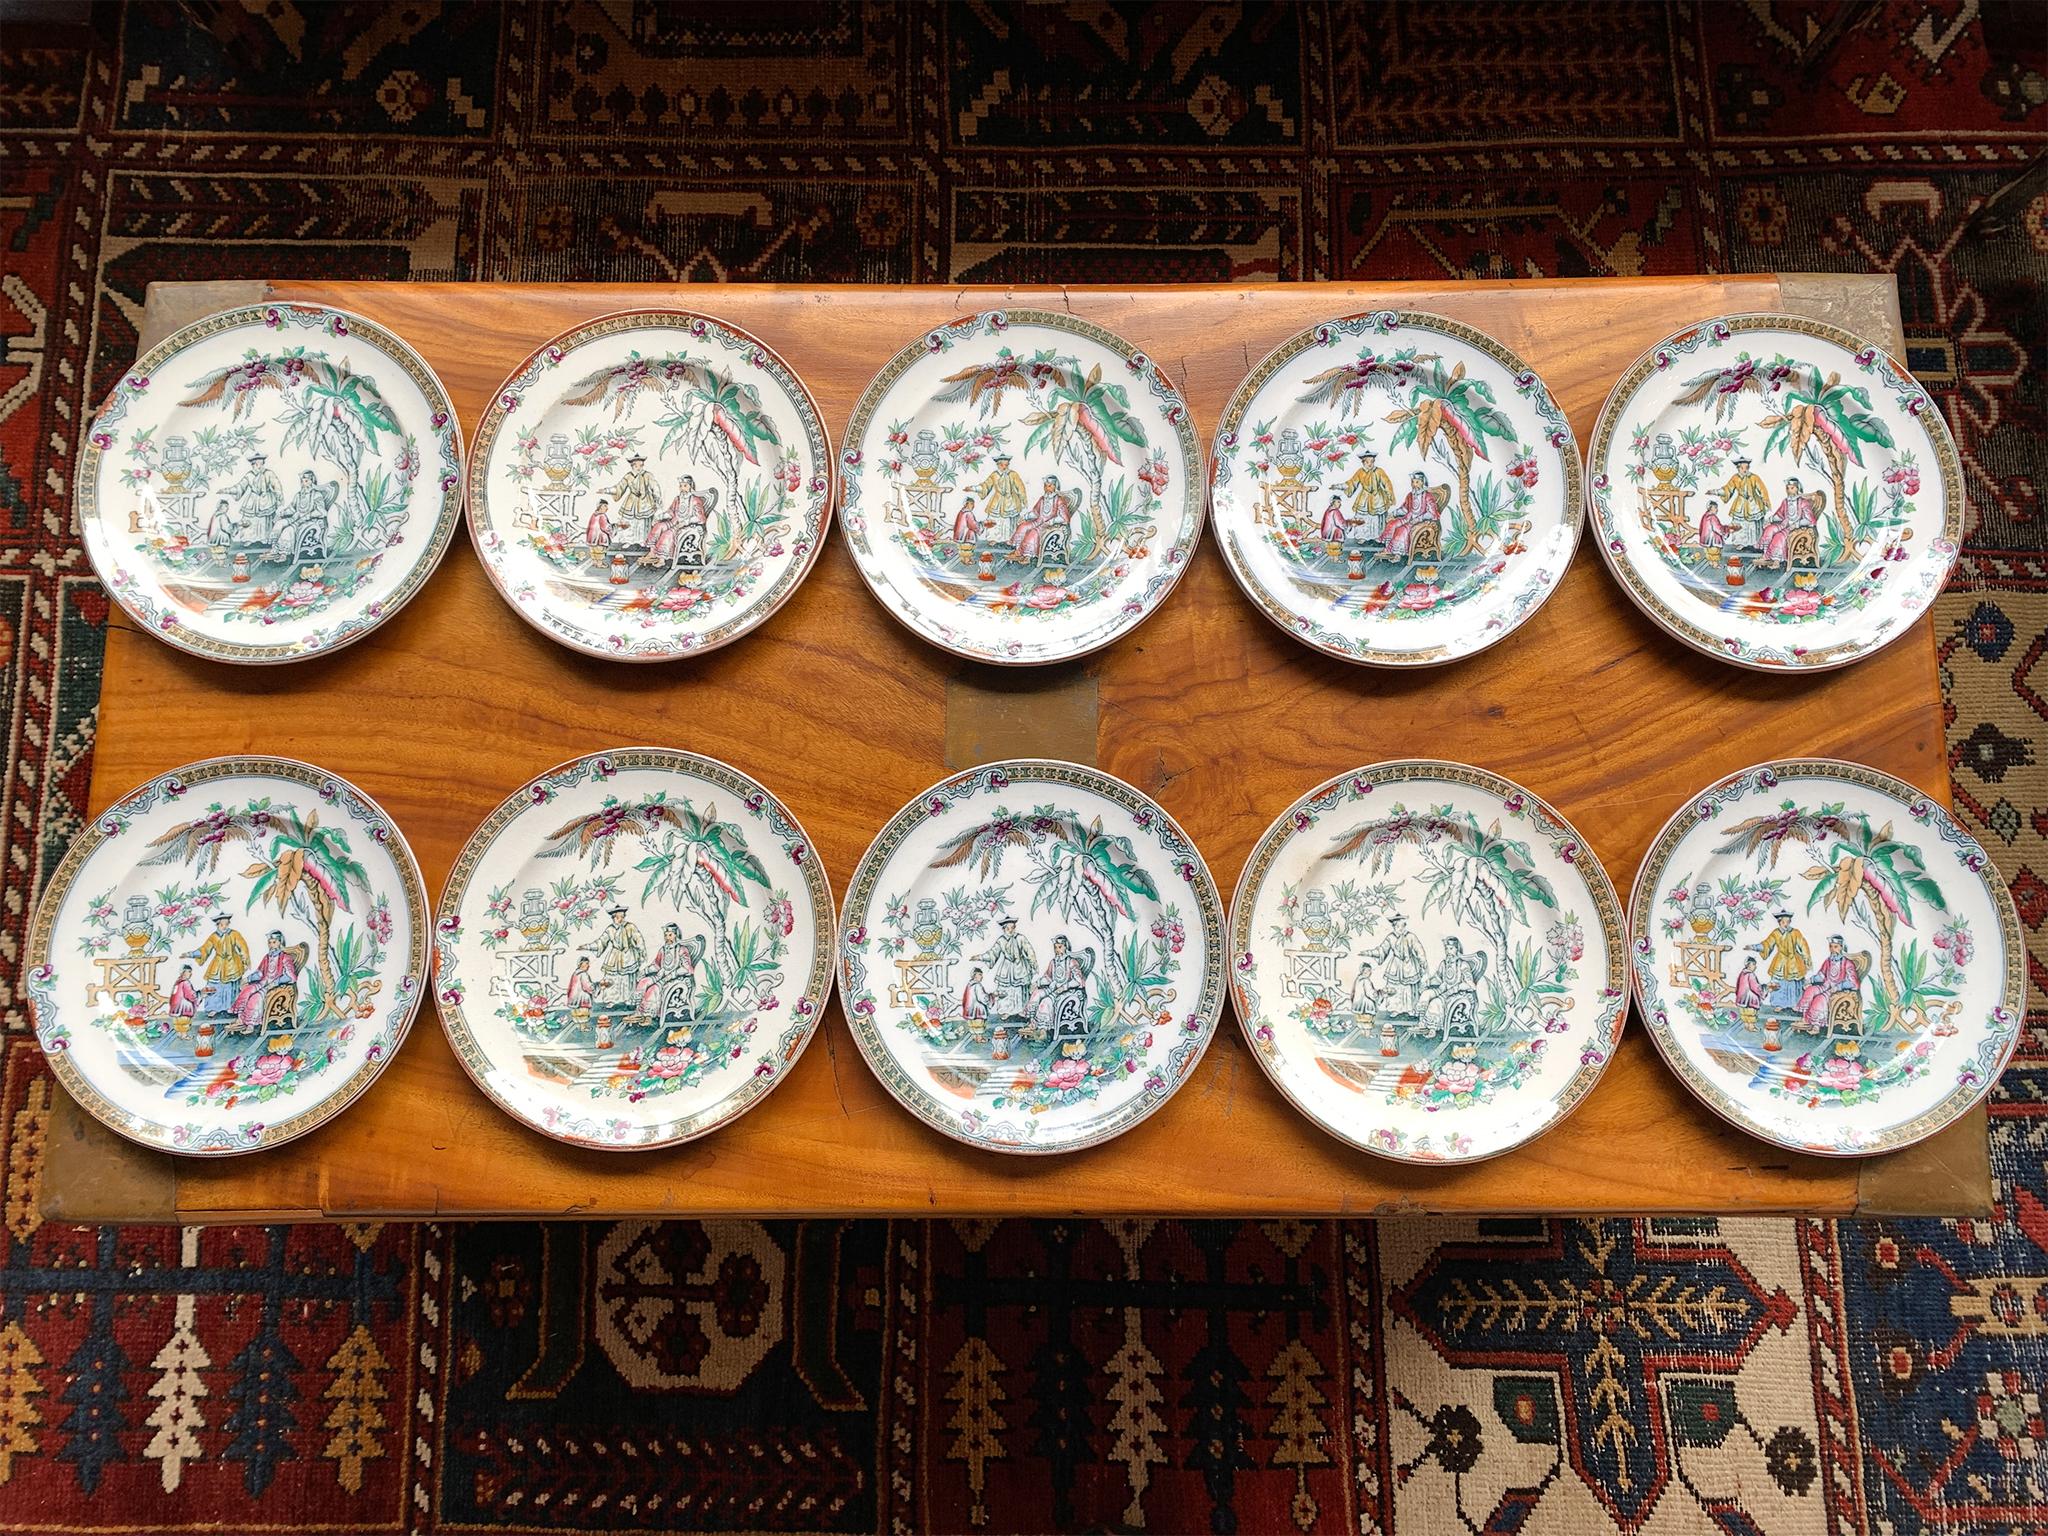 These 10 antique dessert plates were made in the late 19th Century in England by Beech and Hancock. They feature a colorful chinoiserie design.

Dimensions:
9 of the plates measure 8.25 in. diameter x 1 in. height
1 plate measures 8 in. diameter